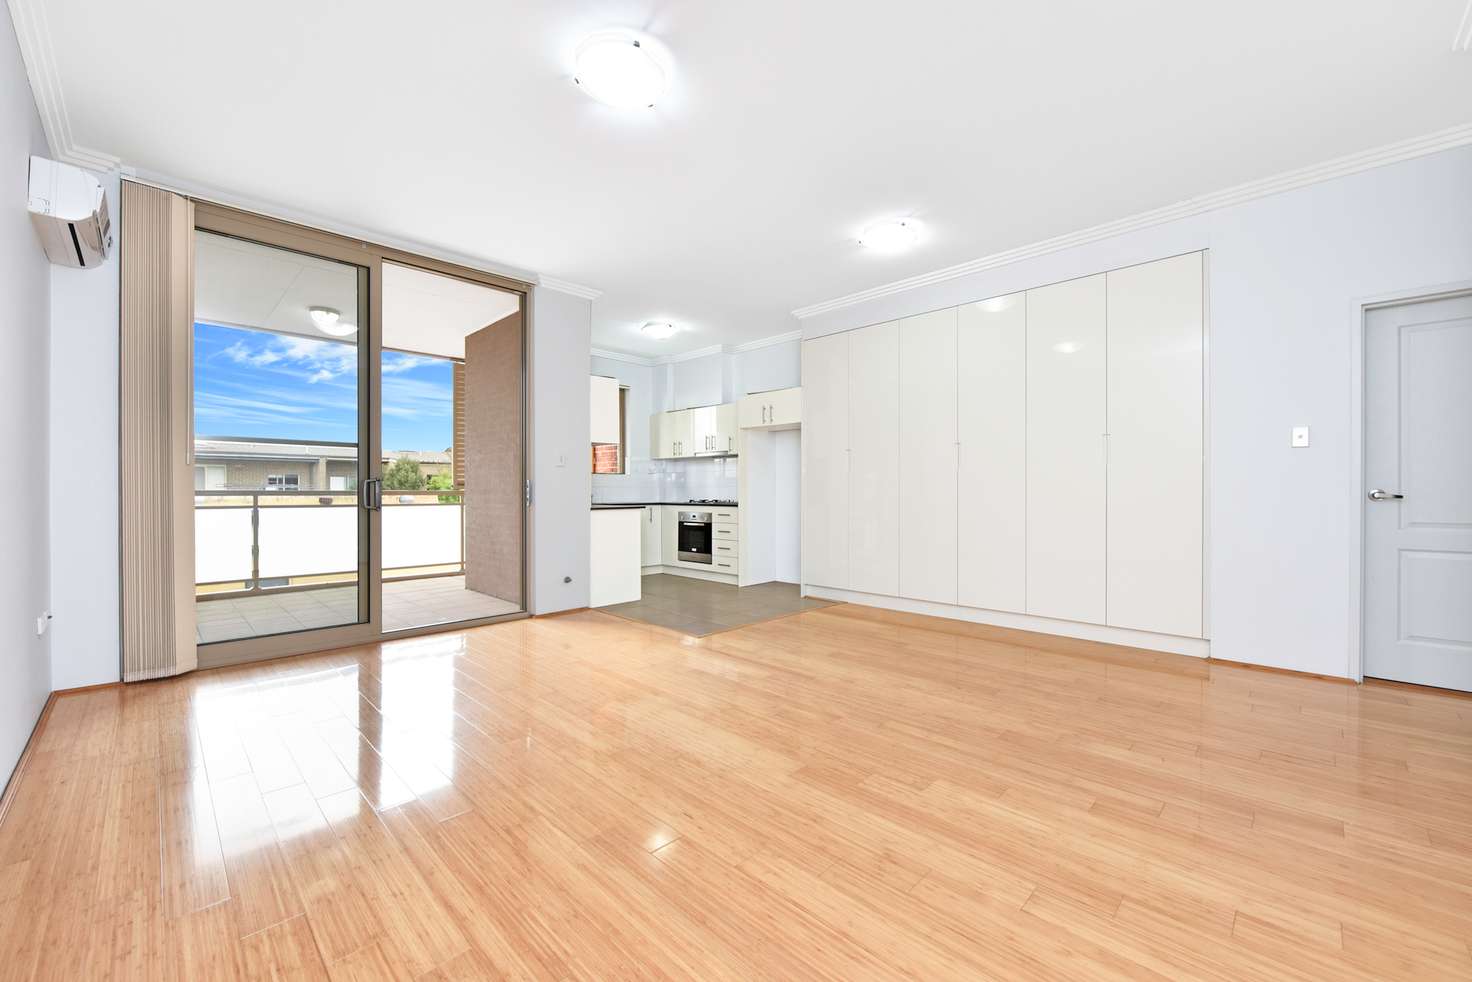 Main view of Homely apartment listing, 8/18-20 Grantham Street, Burwood NSW 2134